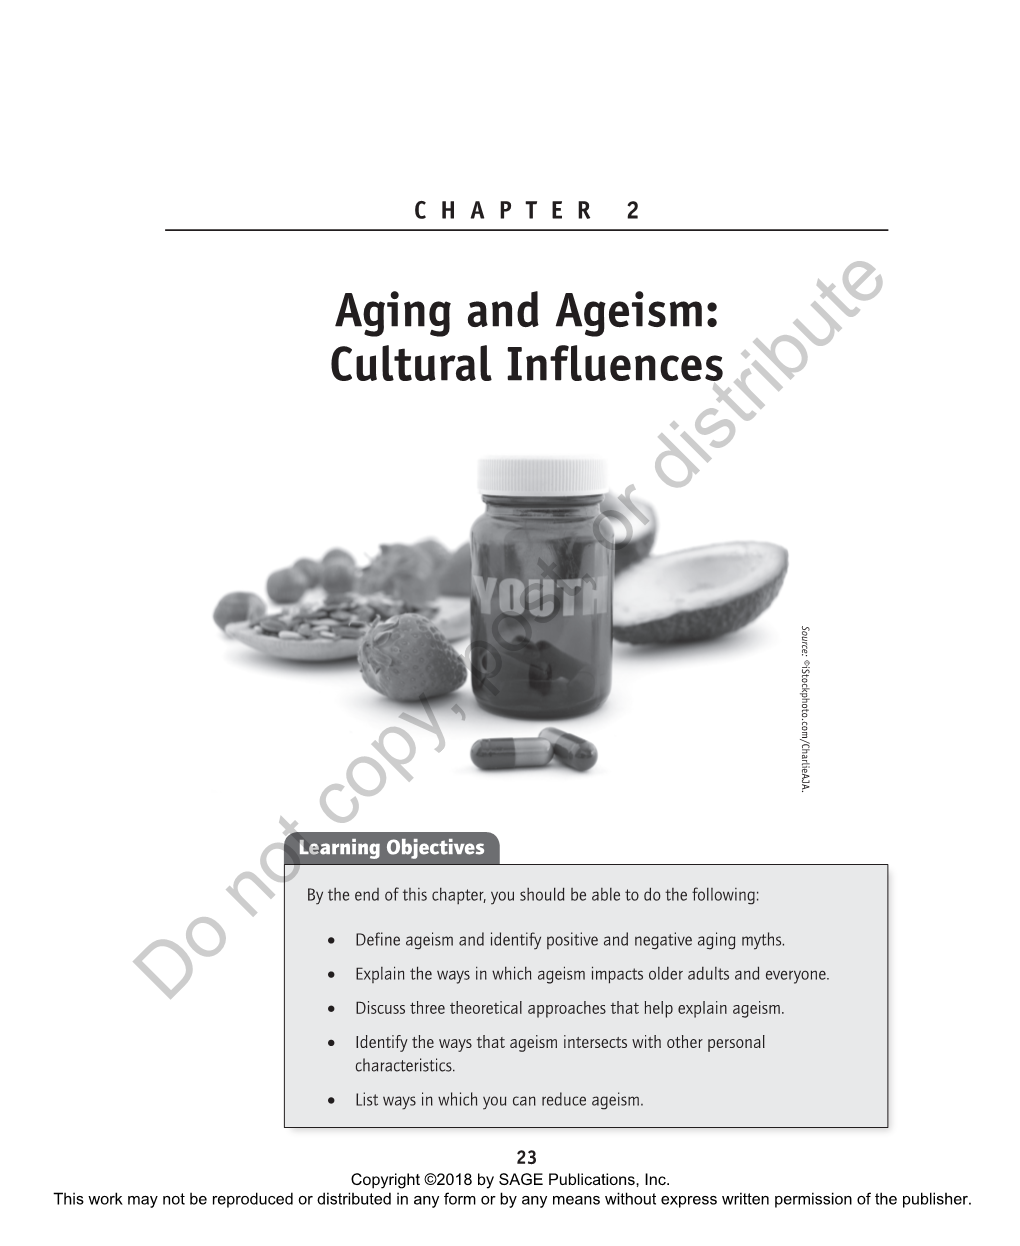 Chapter (2) – (Aging and Ageism: Cultural Influences)